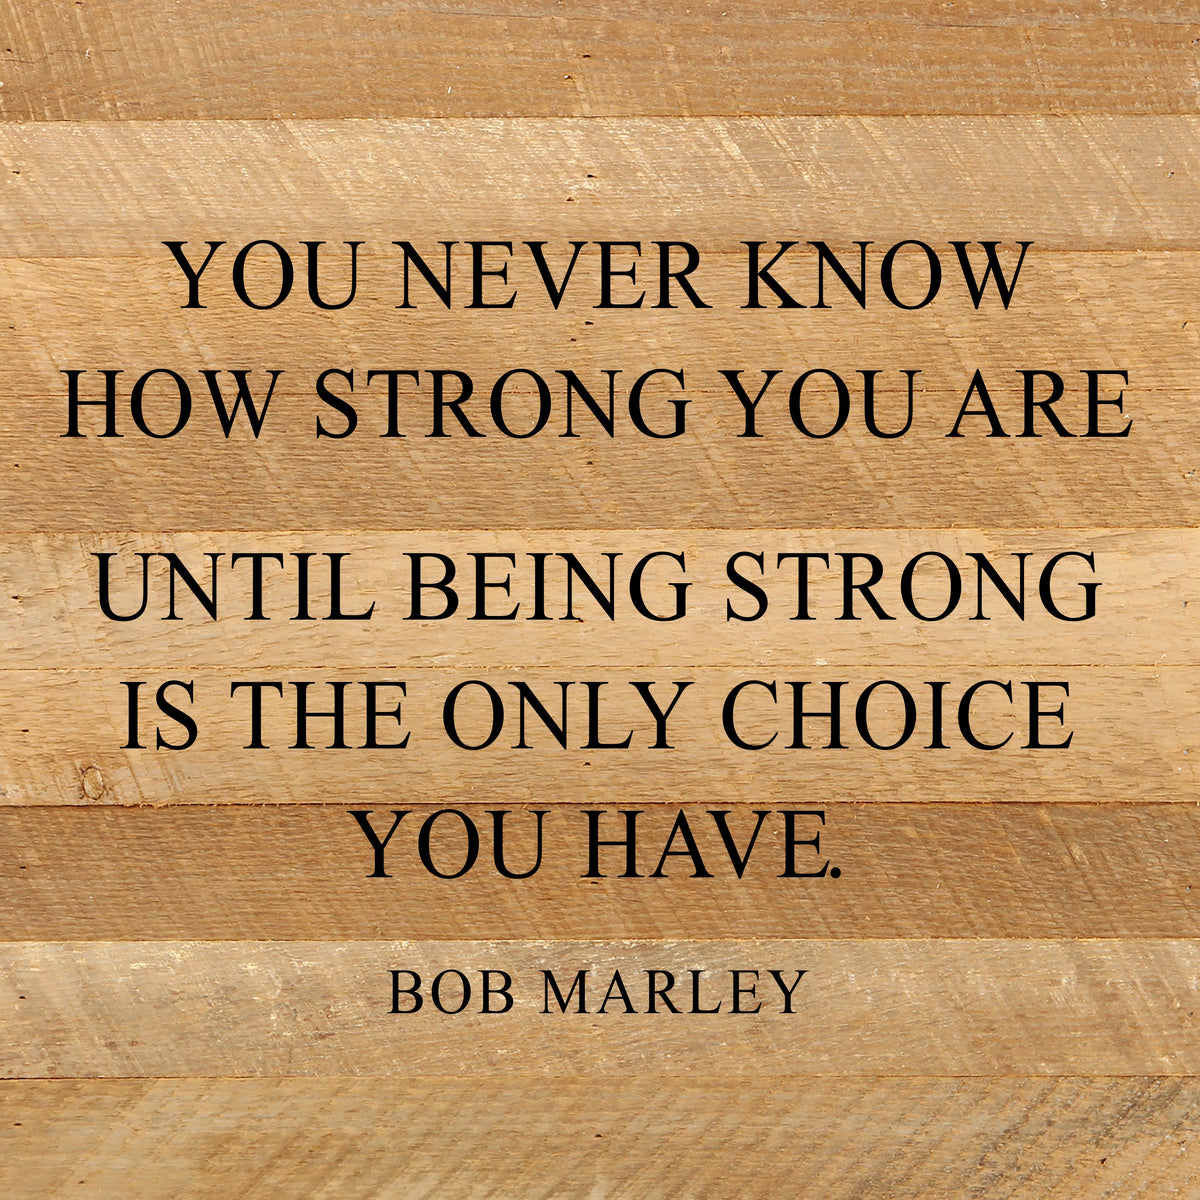 You never know how strong you are until being strong is the only choice you have. ~Bob Marley / 10"x10" Reclaimed Wood Sign